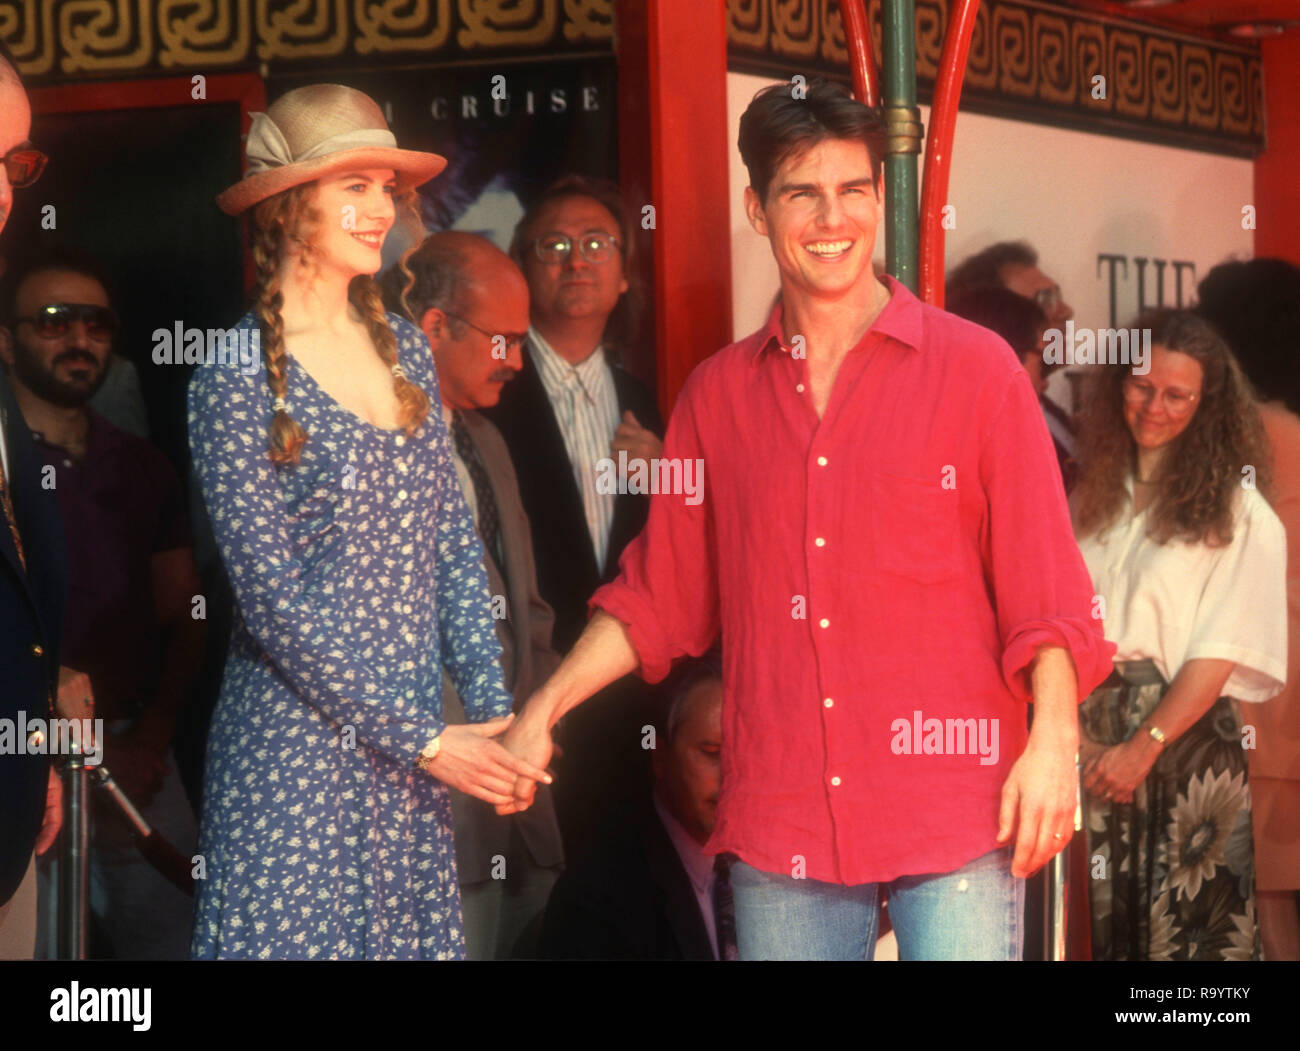 HOLLYWOOD, CA - JUNE 28: Actress Nicole Kidman and actor Tom Cruise attend hand and footprint ceremony for Tom Cruise on June 28, 1993 at Mann's Chinese Theatre in Hollylwood, California. Photo by Barry King/Alamy Stock Photo Stock Photo